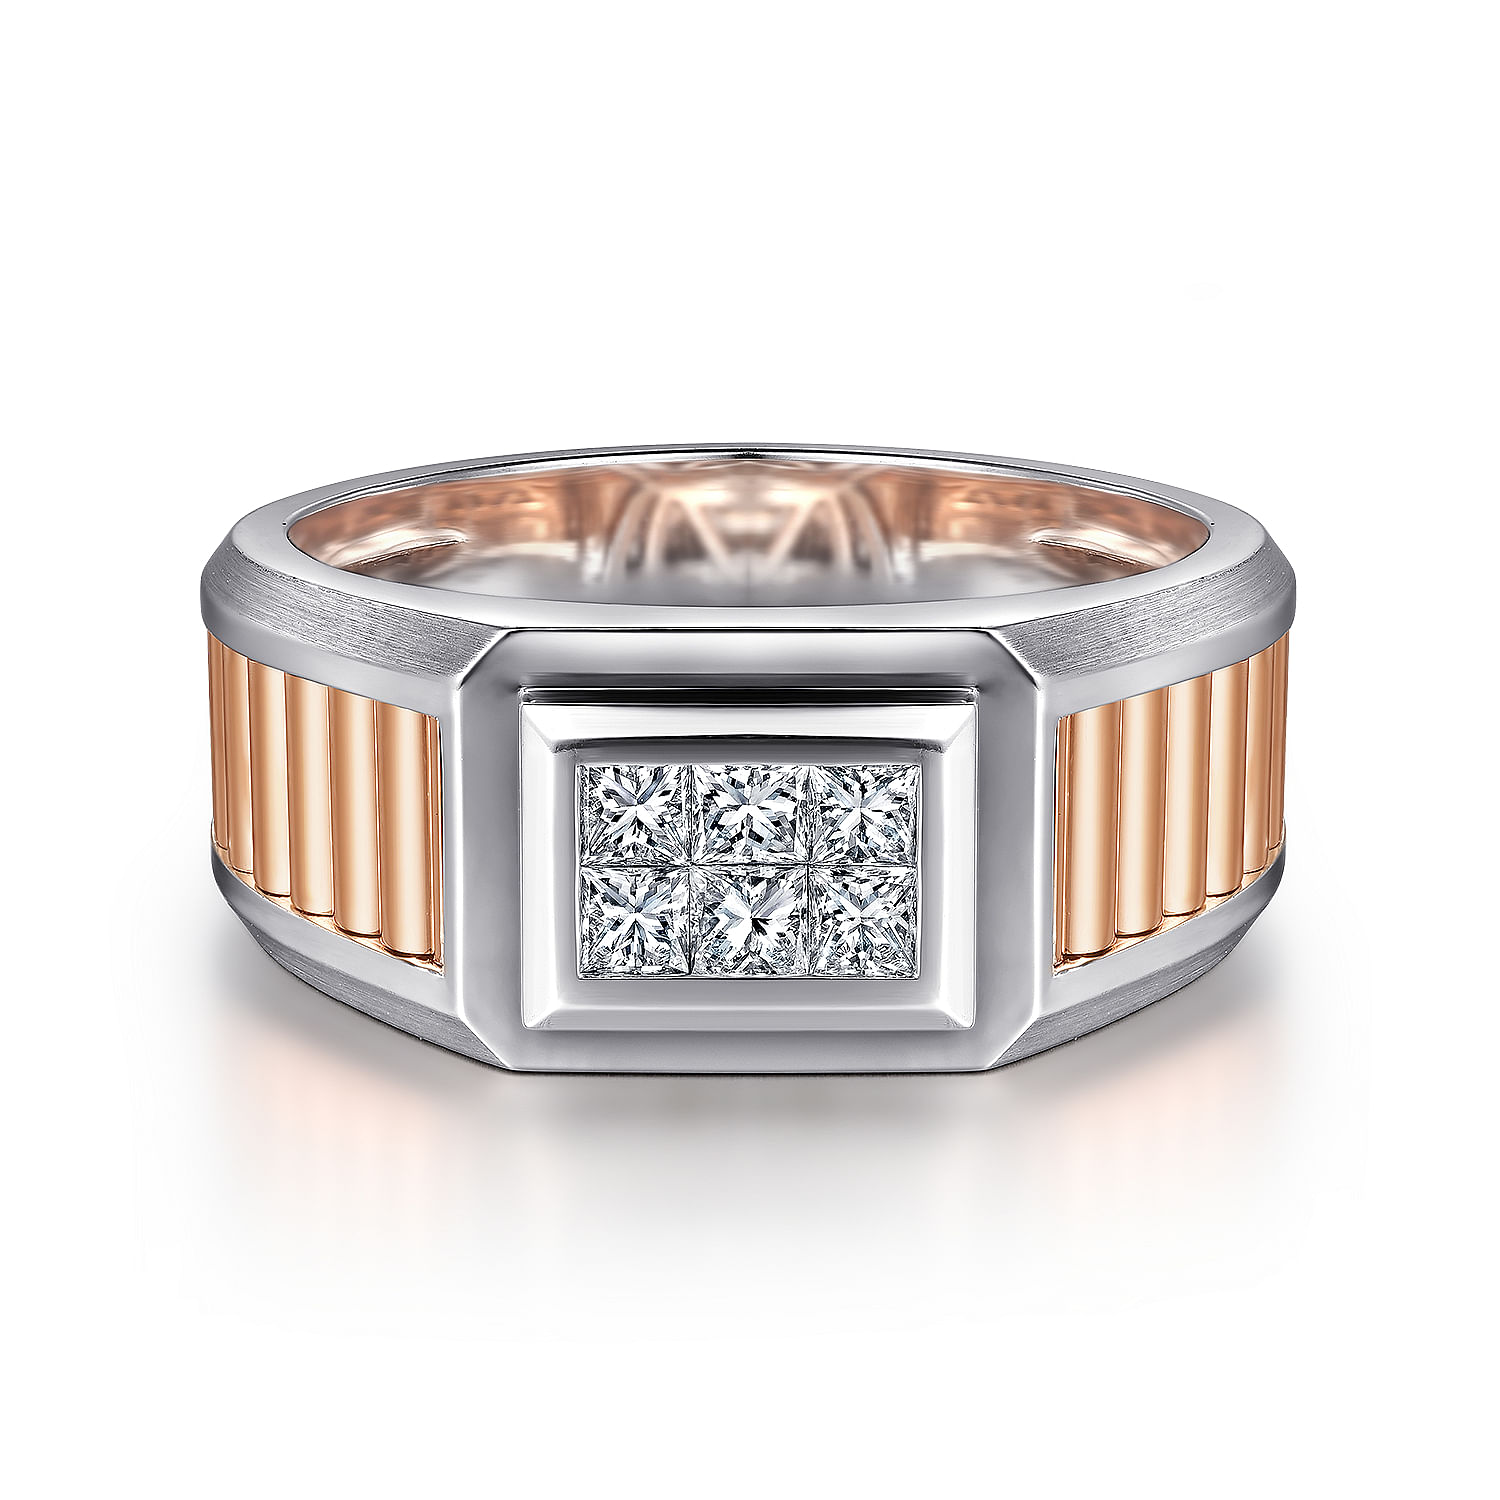 Wide 14K White-Rose Gold Ring with Pavé Diamonds in High Polished Finish